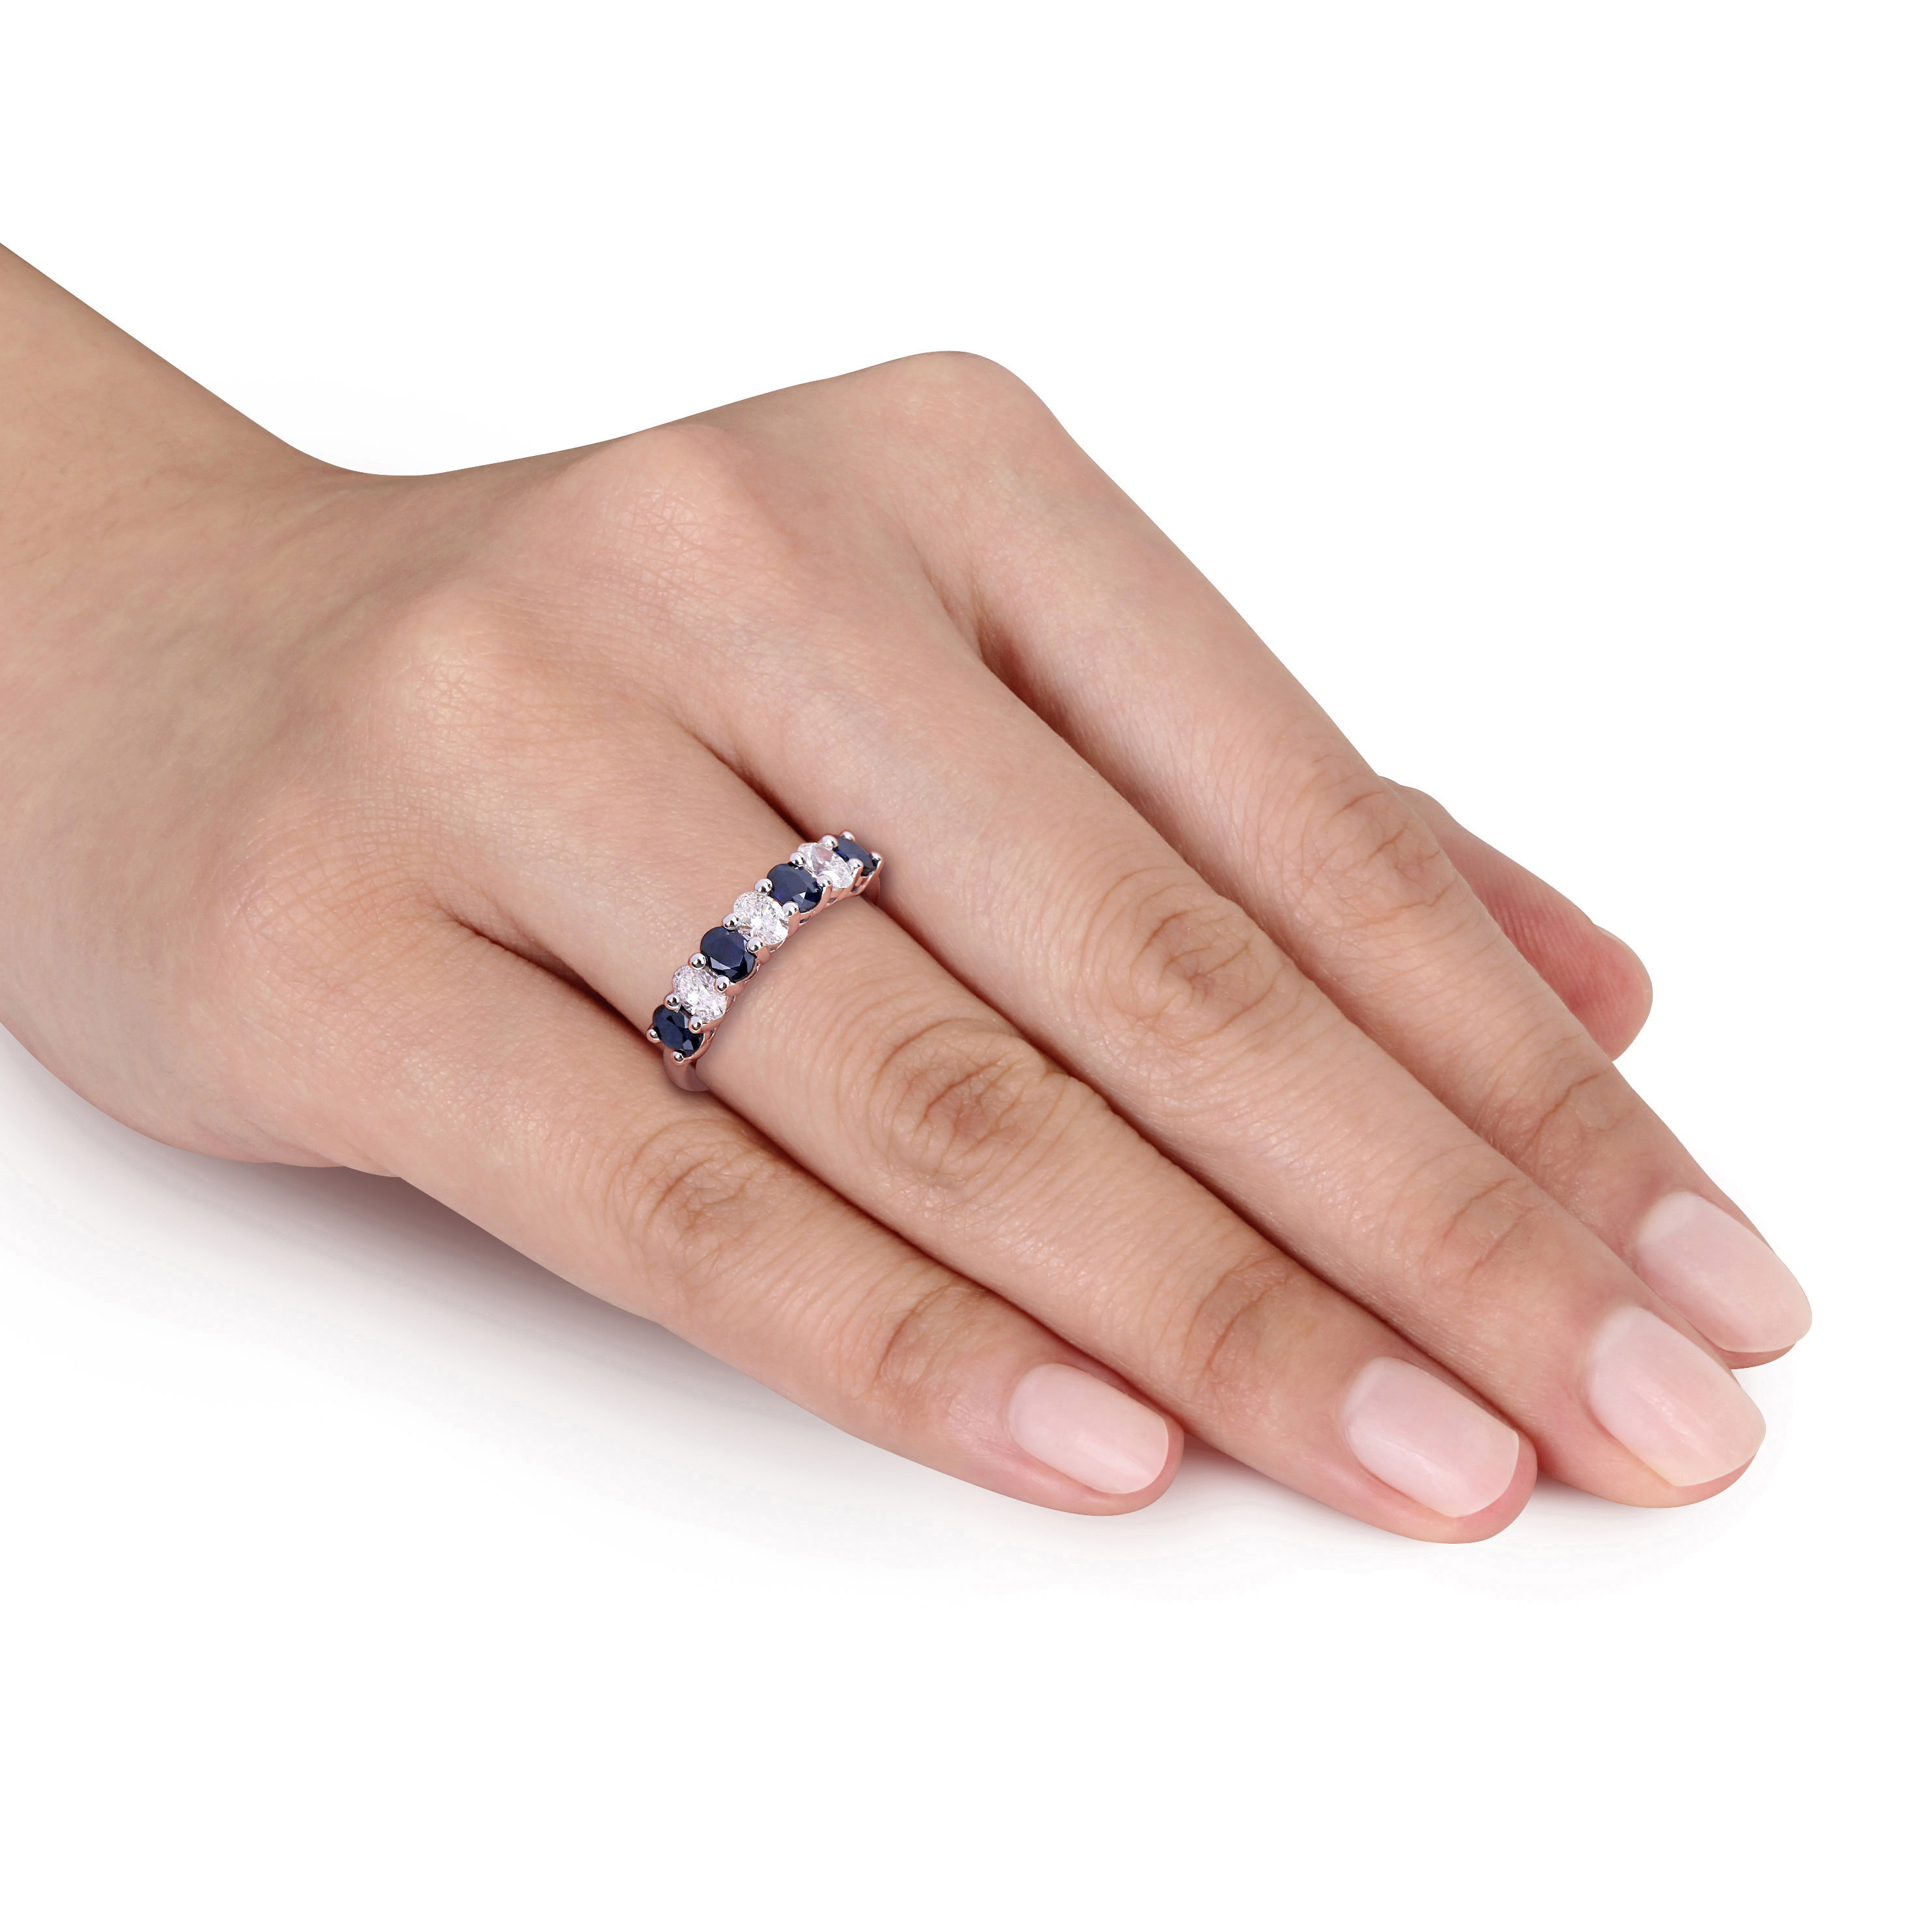 4/5 CT TGW Oval Sapphire and 1/2 CT TW Oval Diamond Semi-Eternity Band in 14k White Gold